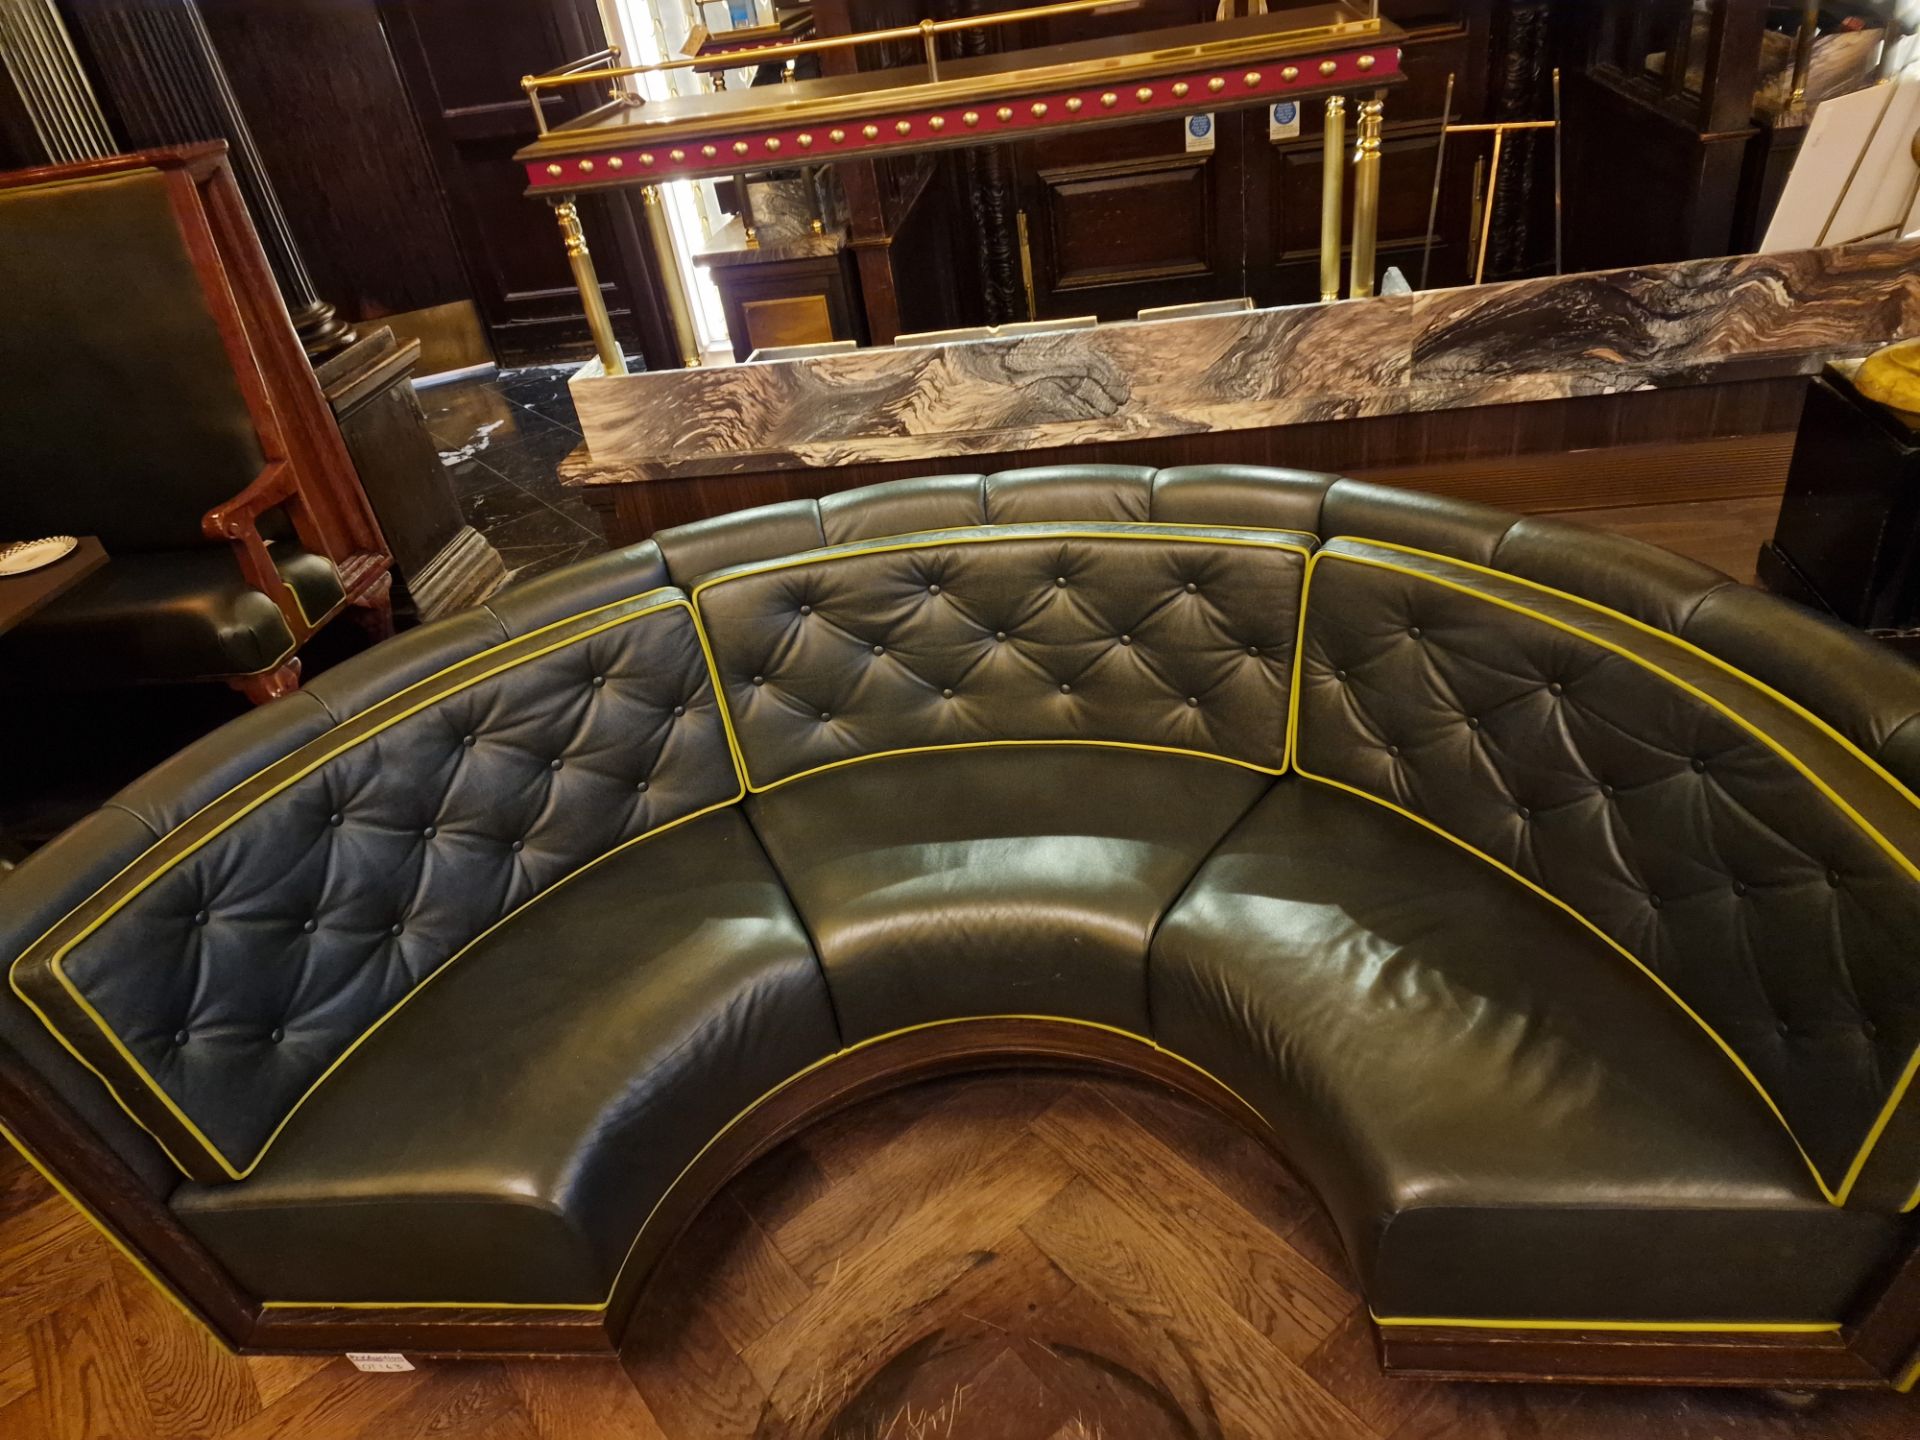 A bespoke Robert Angell tufted leather banquette upholstered in green full leather with piping